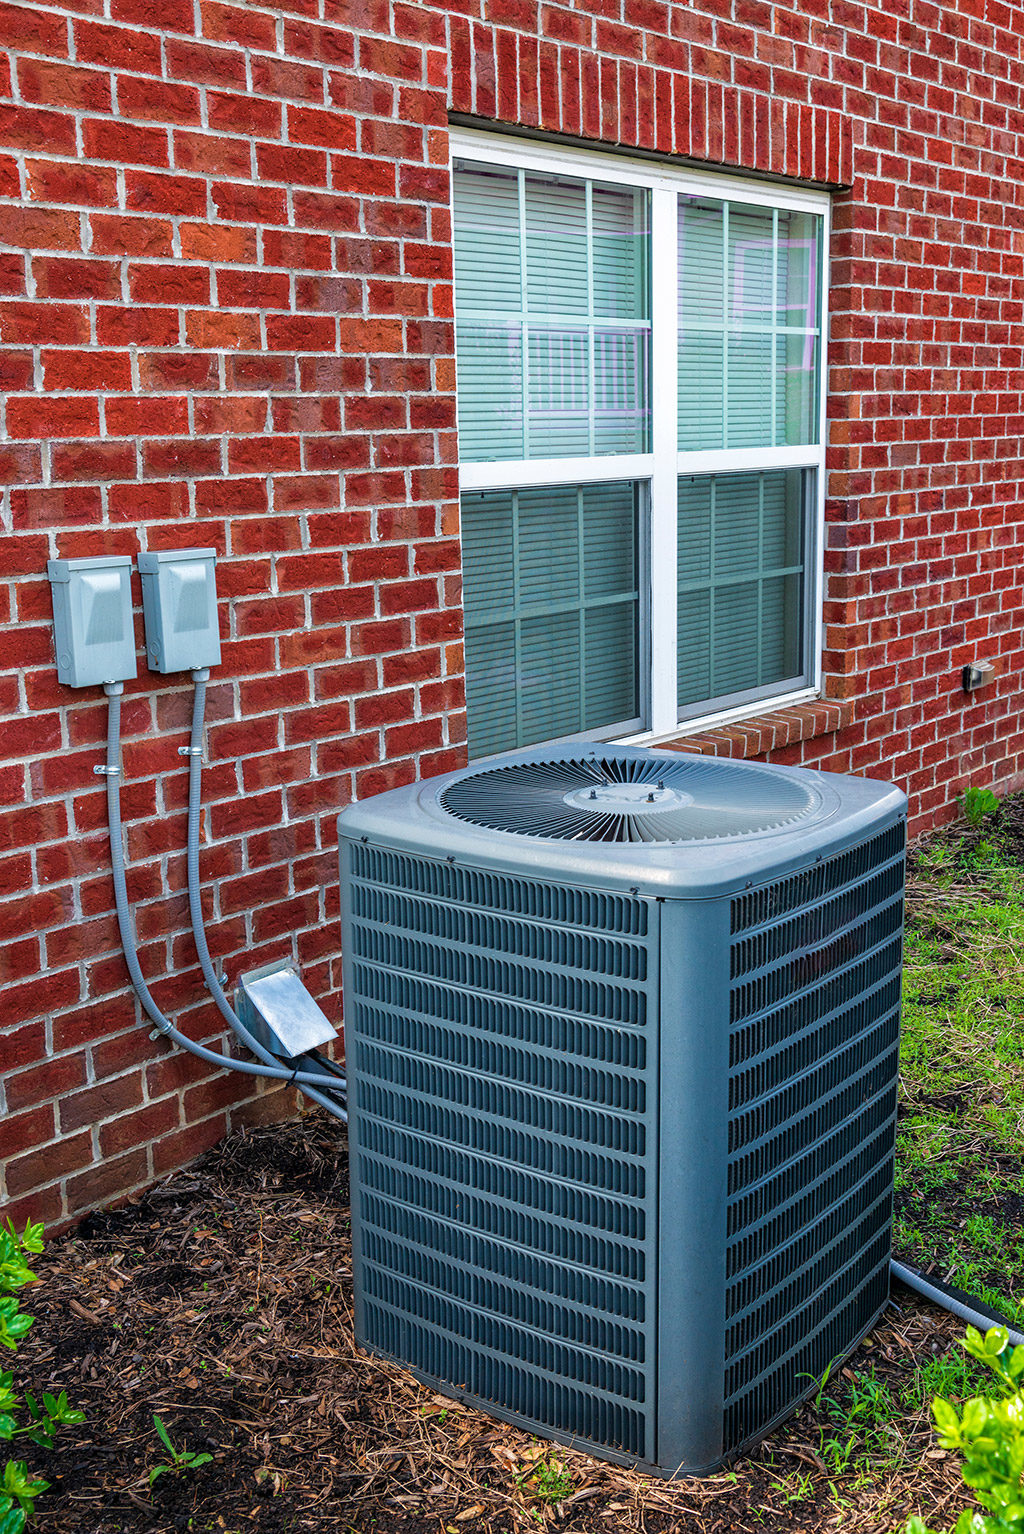 Top 5 Reasons to Maintain Your Air Conditioning Unit | Air Conditioning Service in Frisco, TX